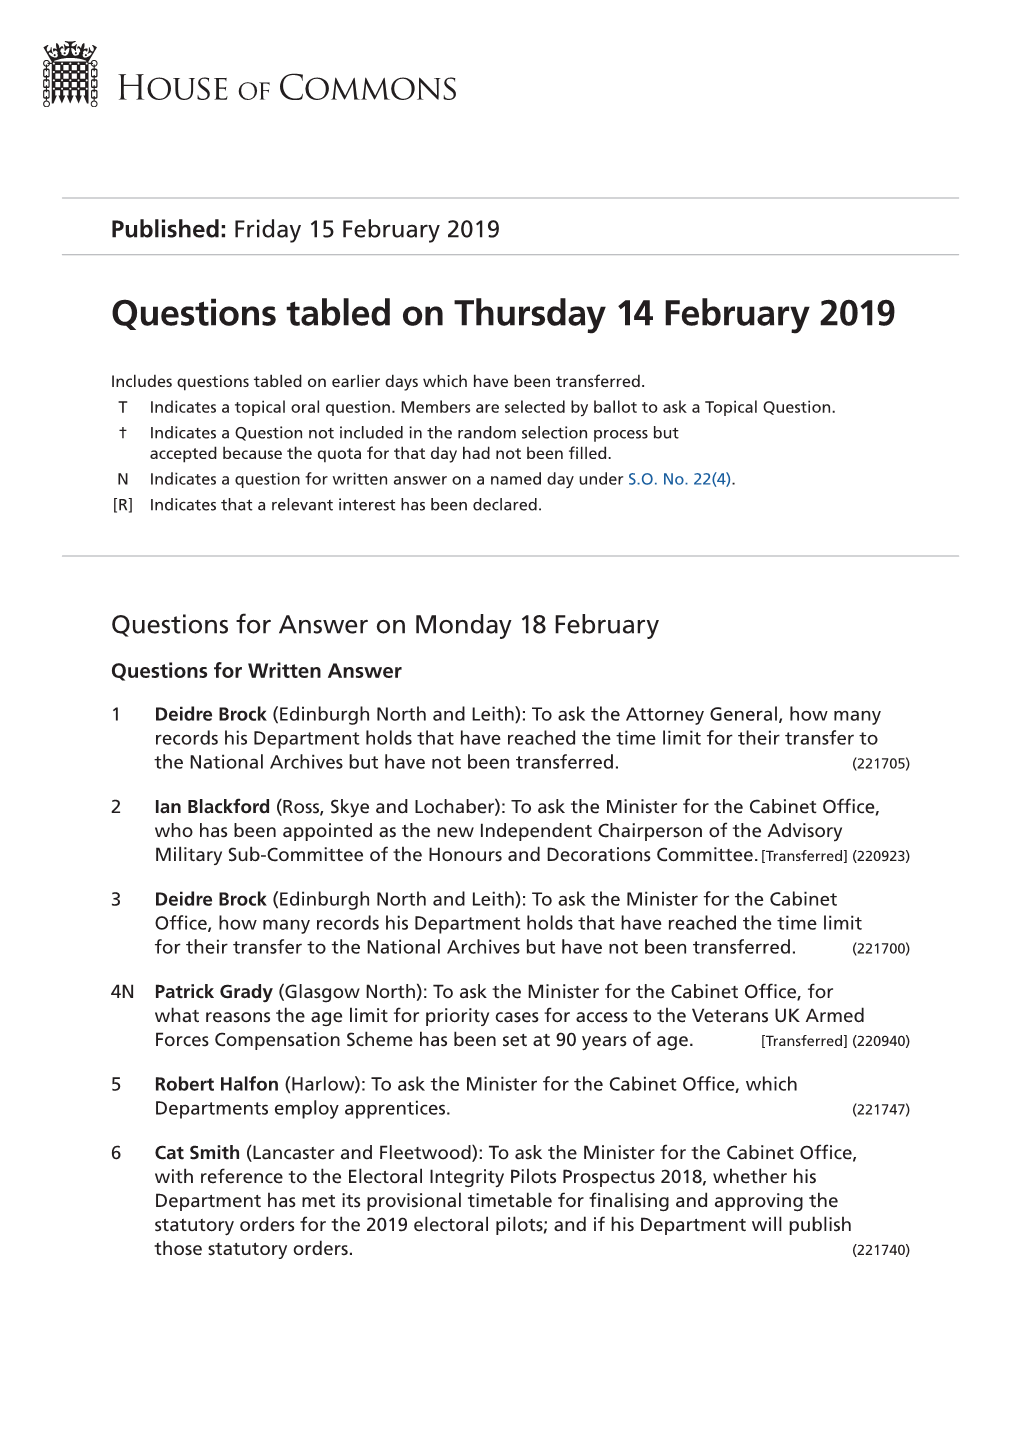 Questions Tabled on Thu 14 Feb 2019